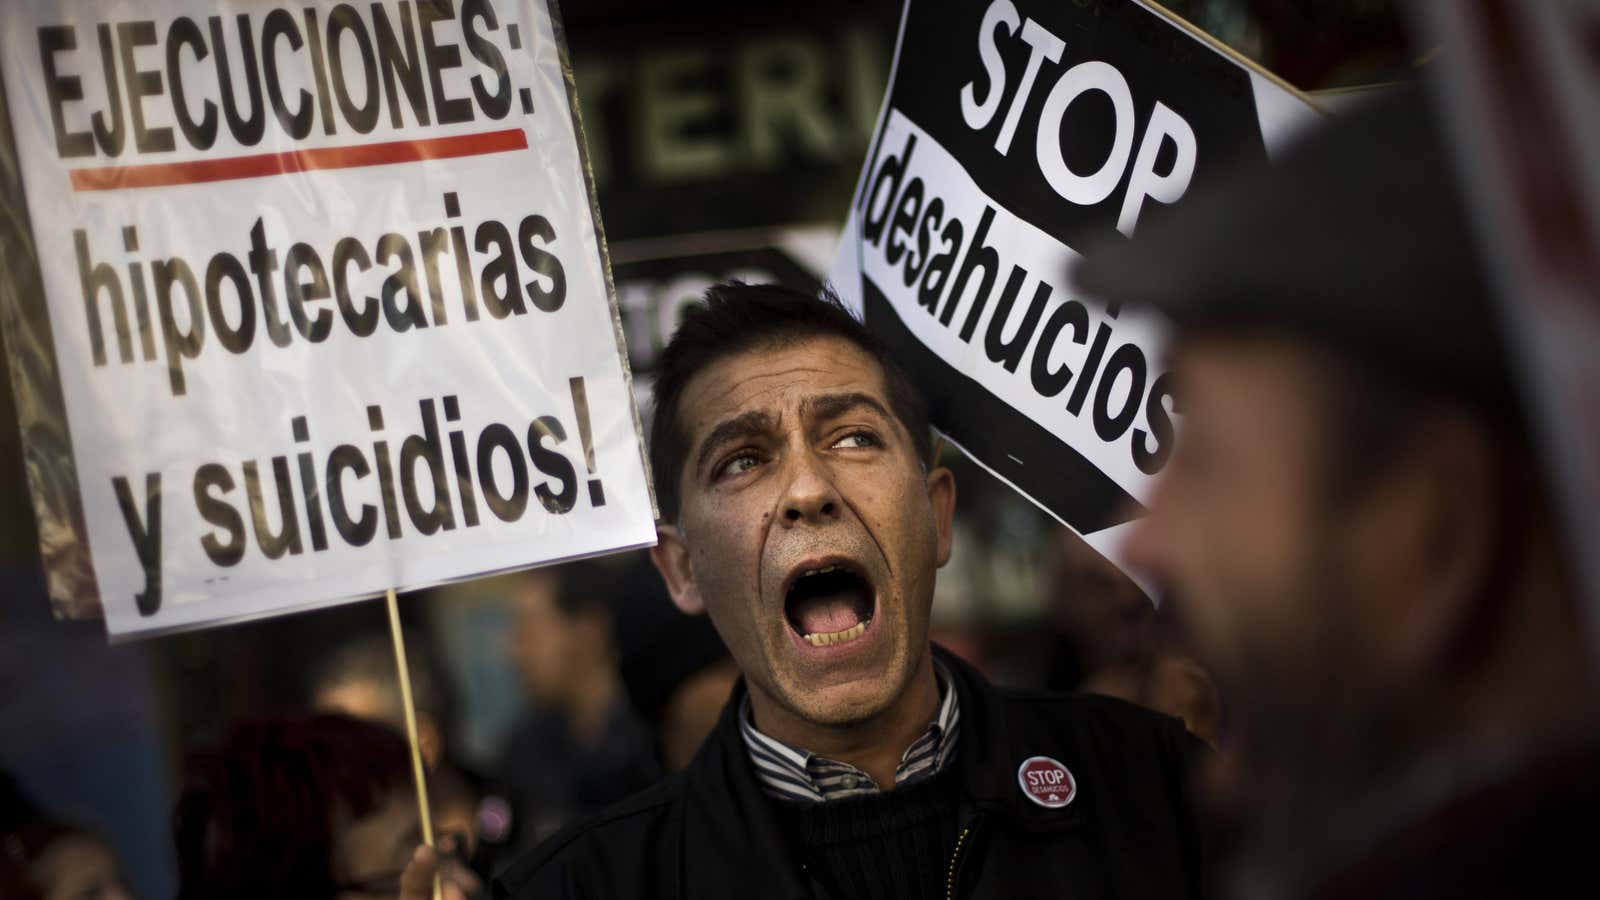 A demonstrator in Madrid holds up a sign that reads “Executions, evictions and suicides” during a protest in front of the conservative party PP headquarters.